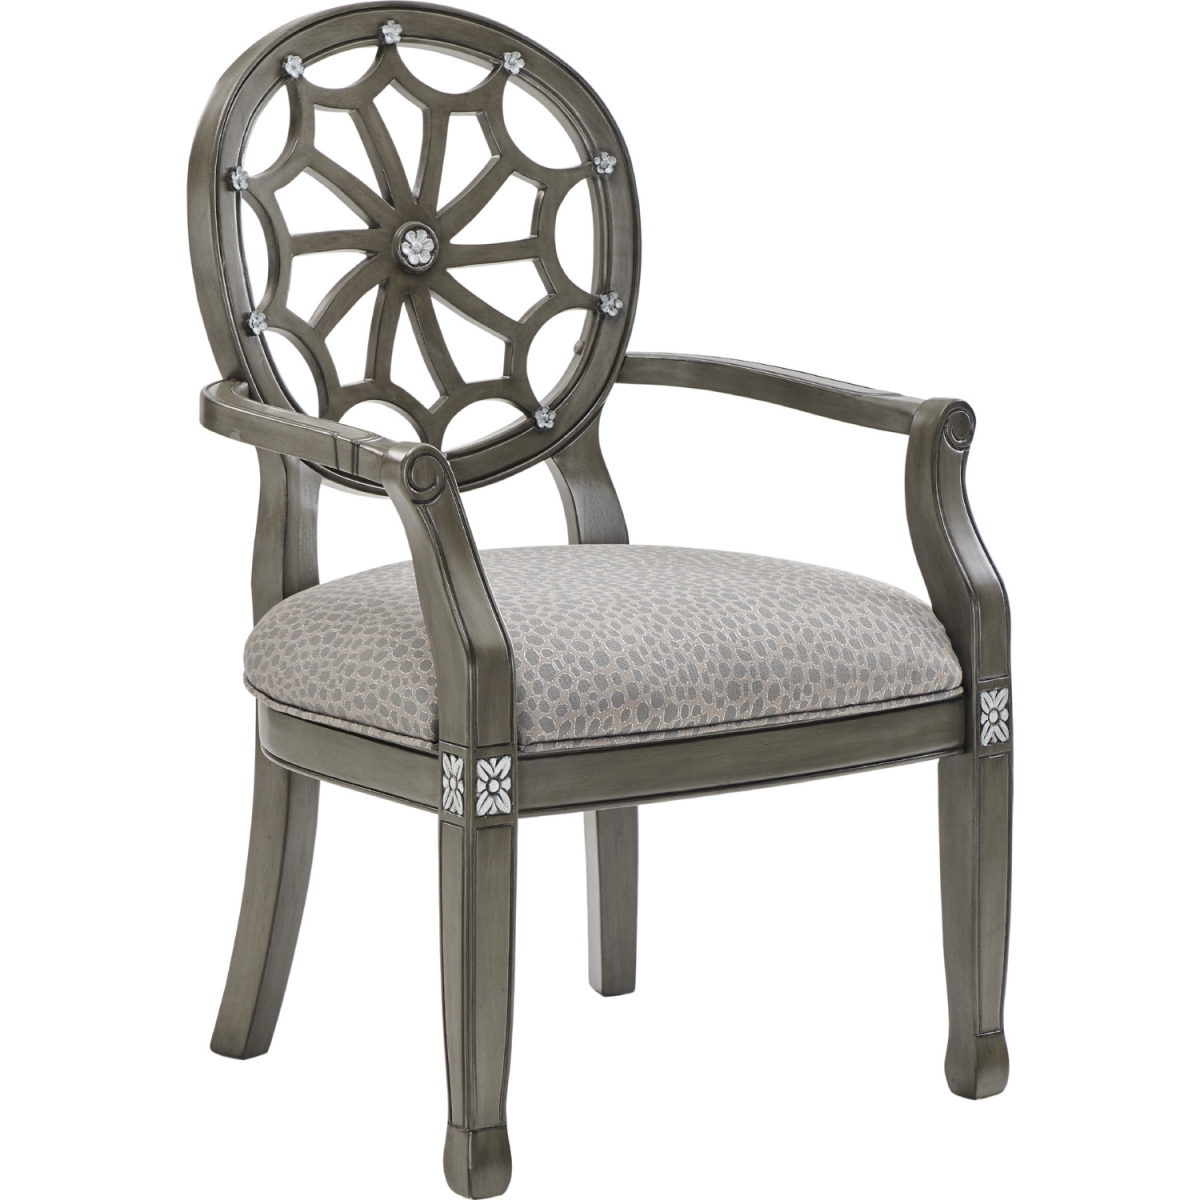 D1225s19 Spider Web Back Accent Chair, Grey